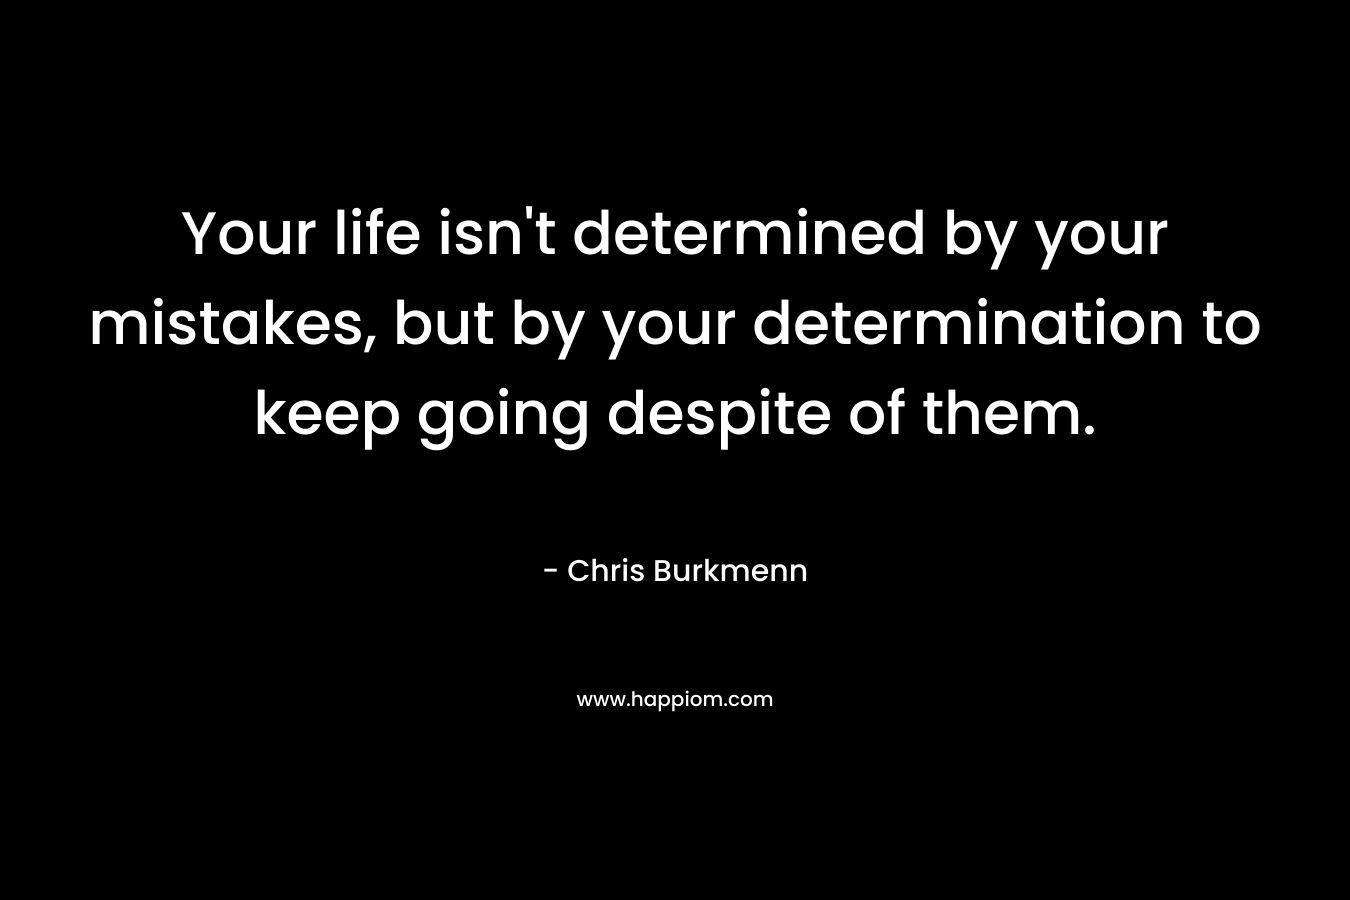 Your life isn't determined by your mistakes, but by your determination to keep going despite of them.